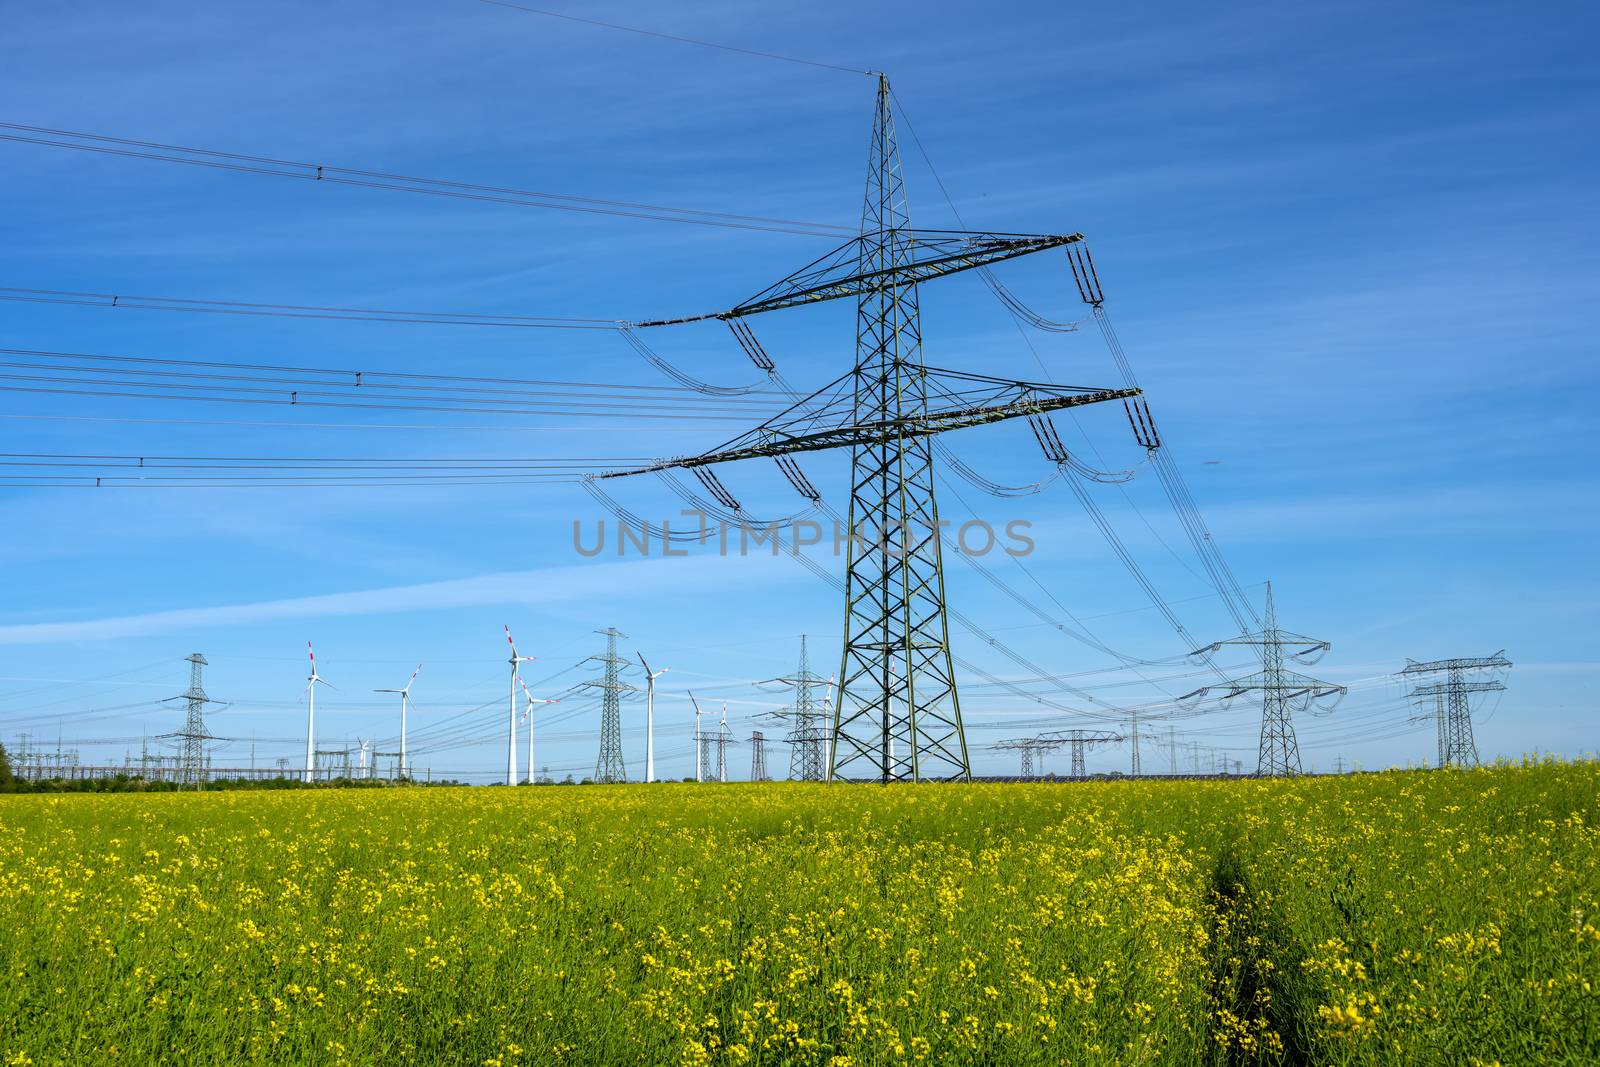 Electricity pylons and power lines seen in Germany